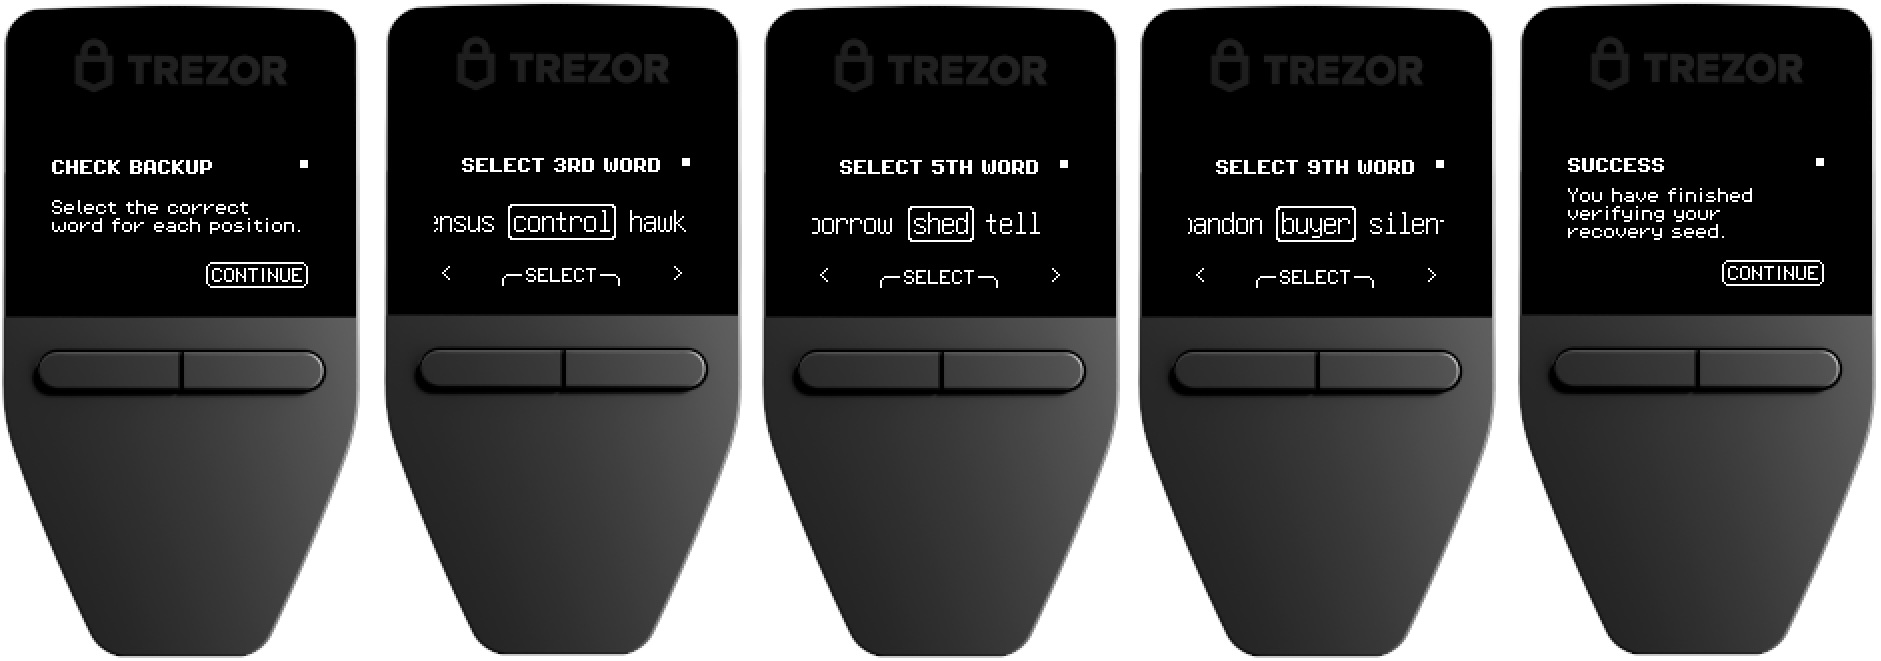 How To Setup And Use The Trezor Model T Hardware Wallet – The Crypto Merchant